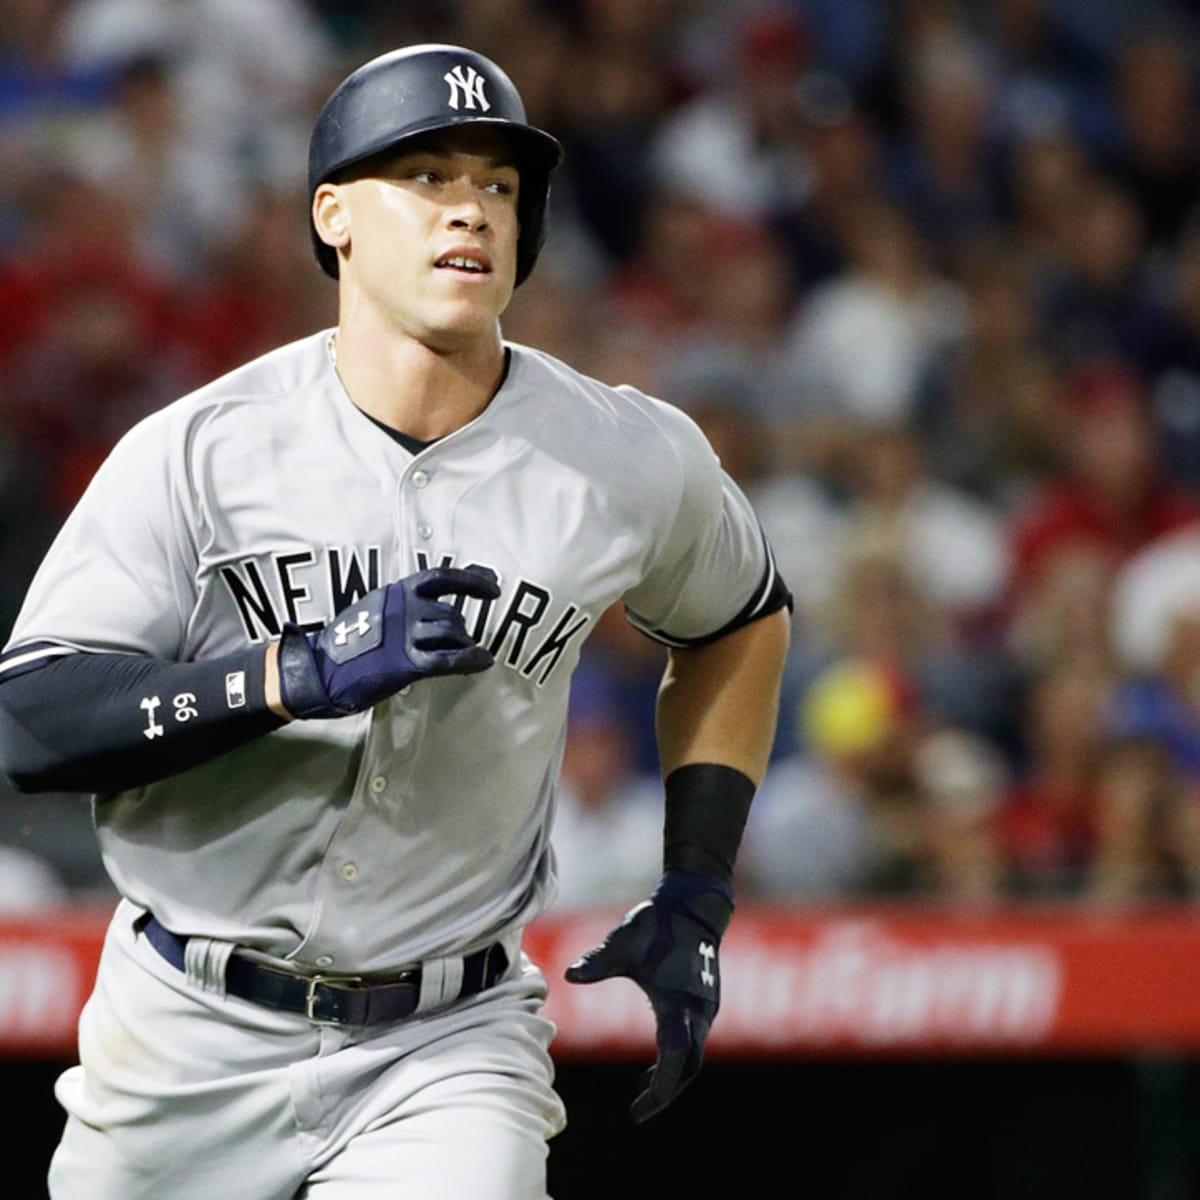 Yankees' rookie Aaron Judge cannot be stopped - Sports Illustrated